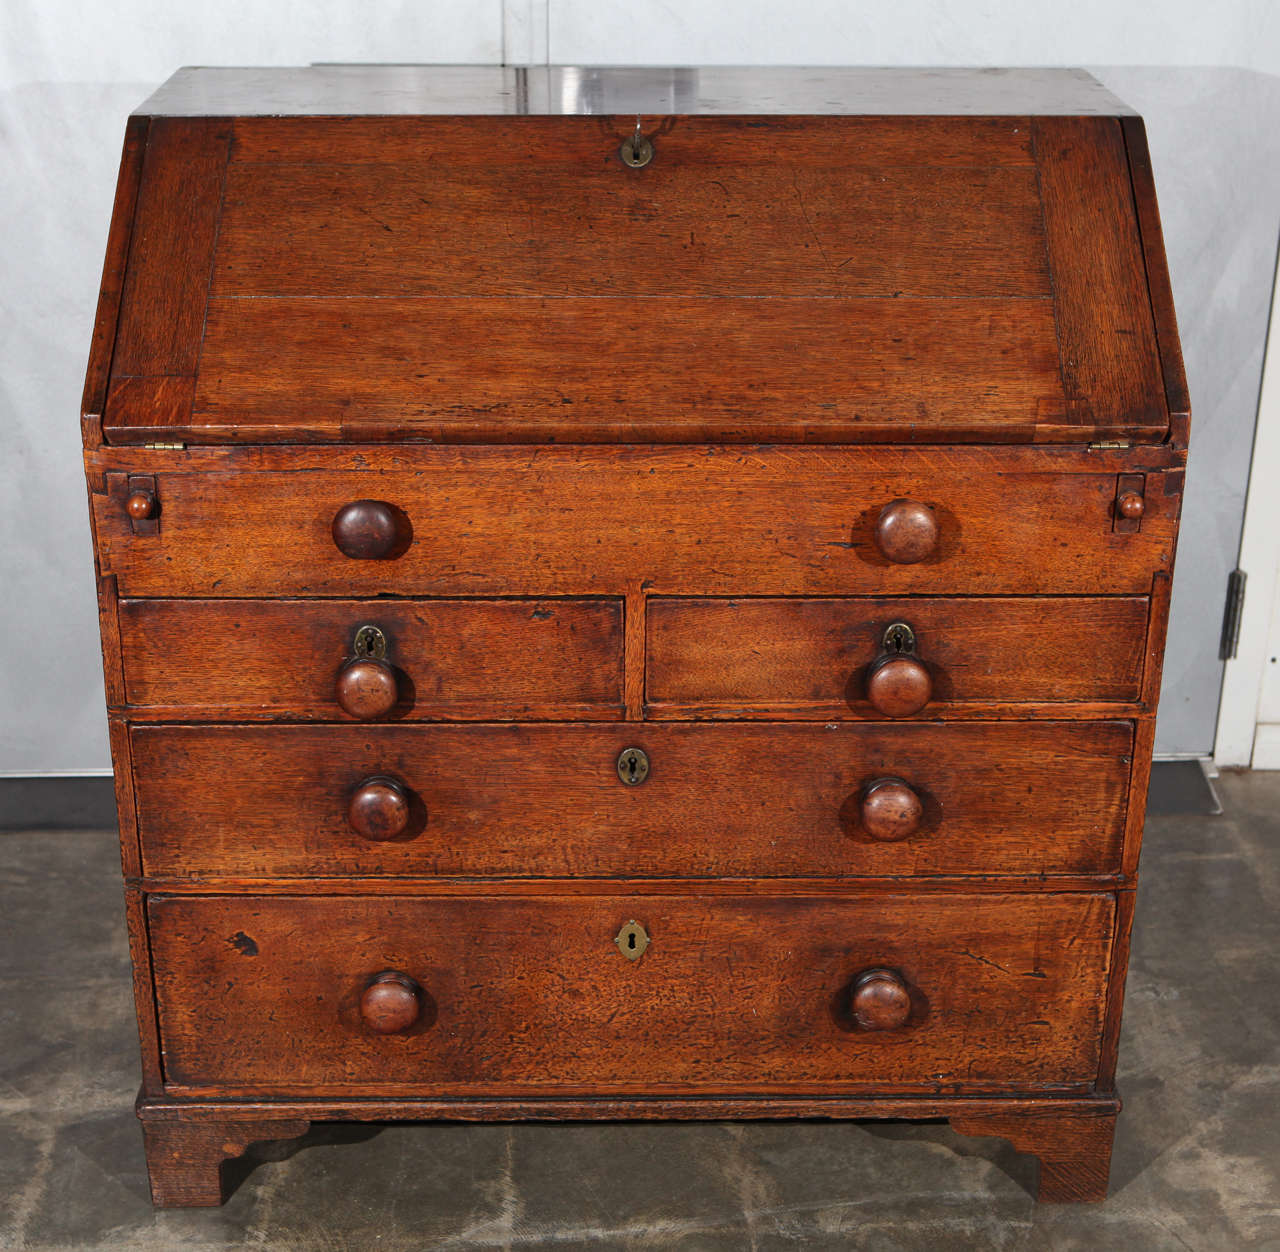 This is a wonderful small-scale oak bureau on bracket feet. This handsome bureau opens to reveal a sweet little desk. The desk holds five small drawers and a center well that leads to two secret compartments at the back of the two side drawers. In